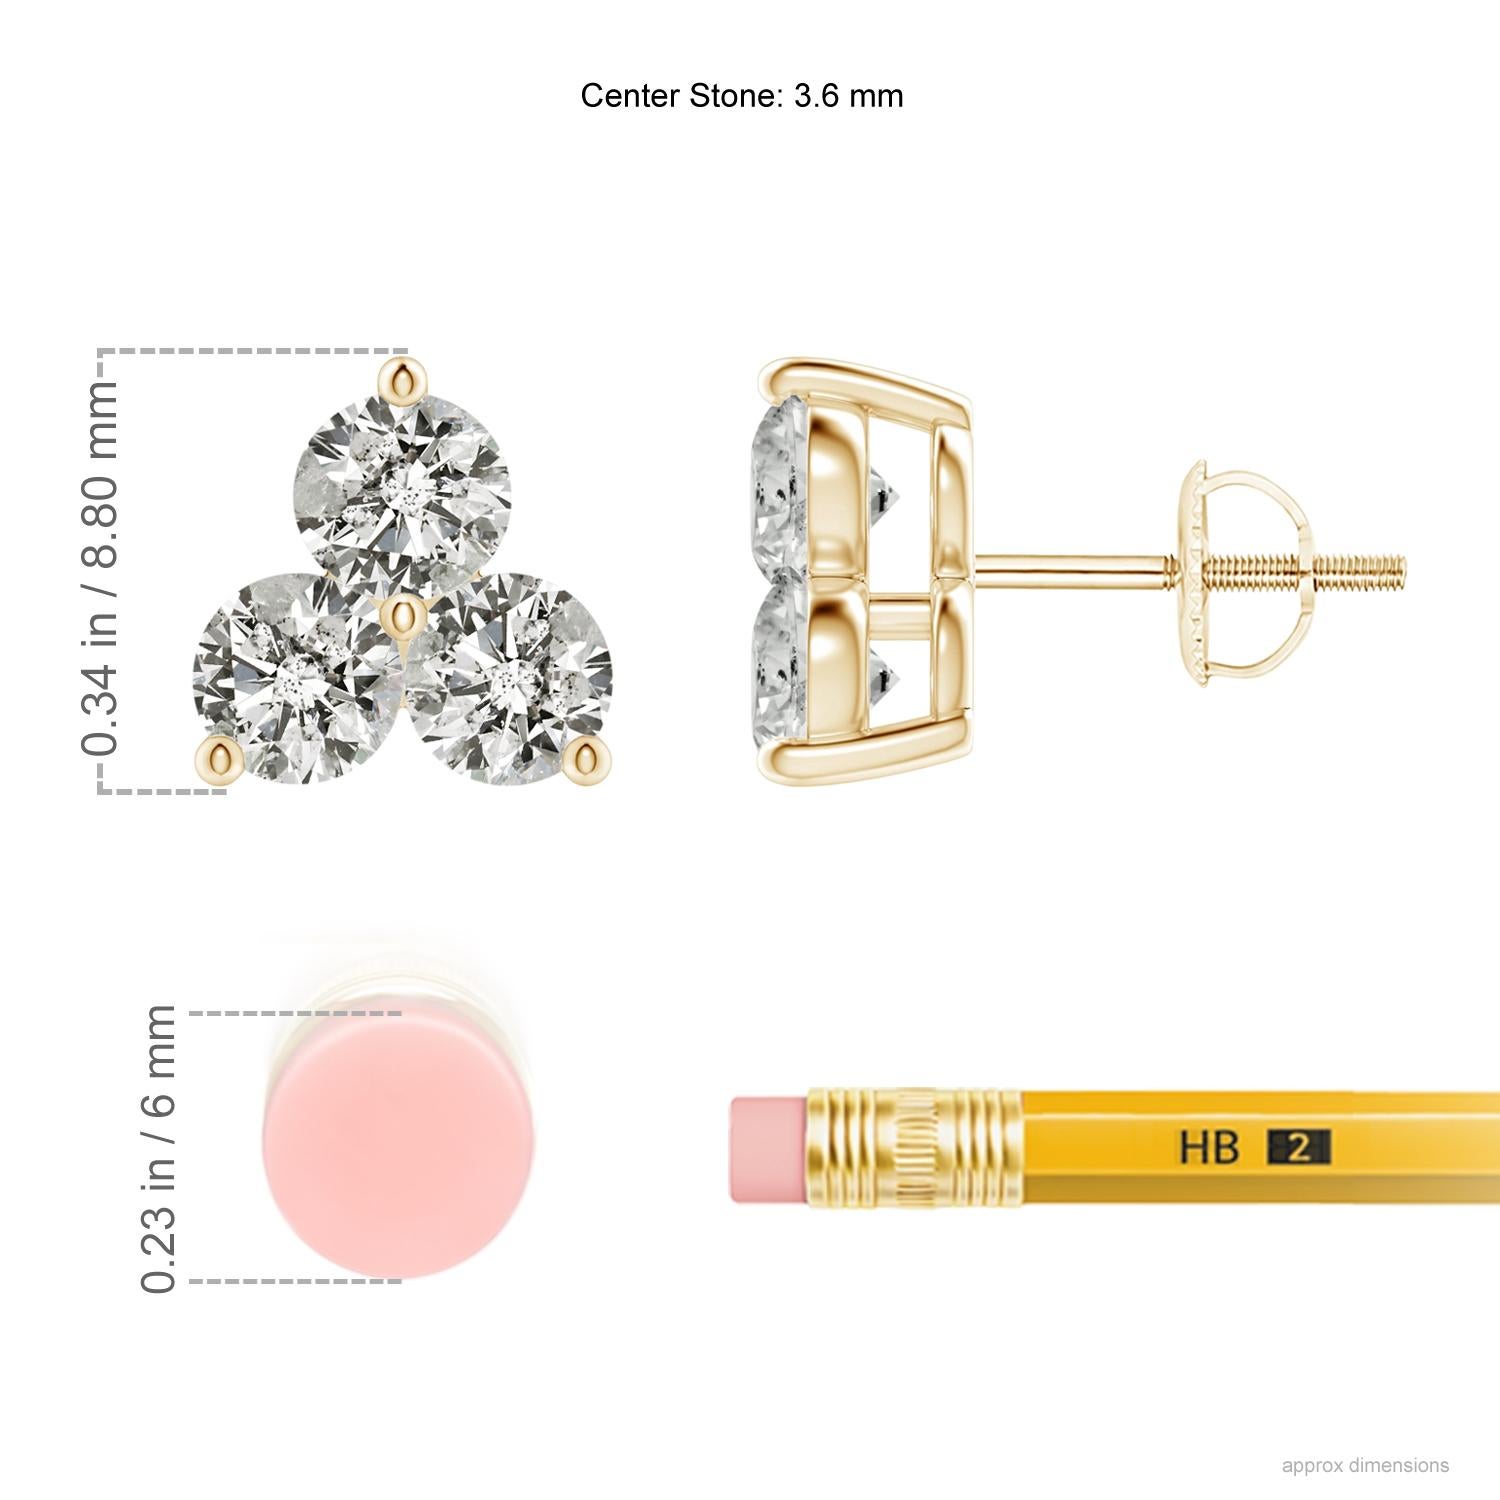 Trios of sparkling round diamonds are held in a shared prong setting to look like fascinating clusters on these stud earrings. Their glimmering white allure will enchant you and accentuate your look in a beautiful way. Crafted in 14K yellow gold,